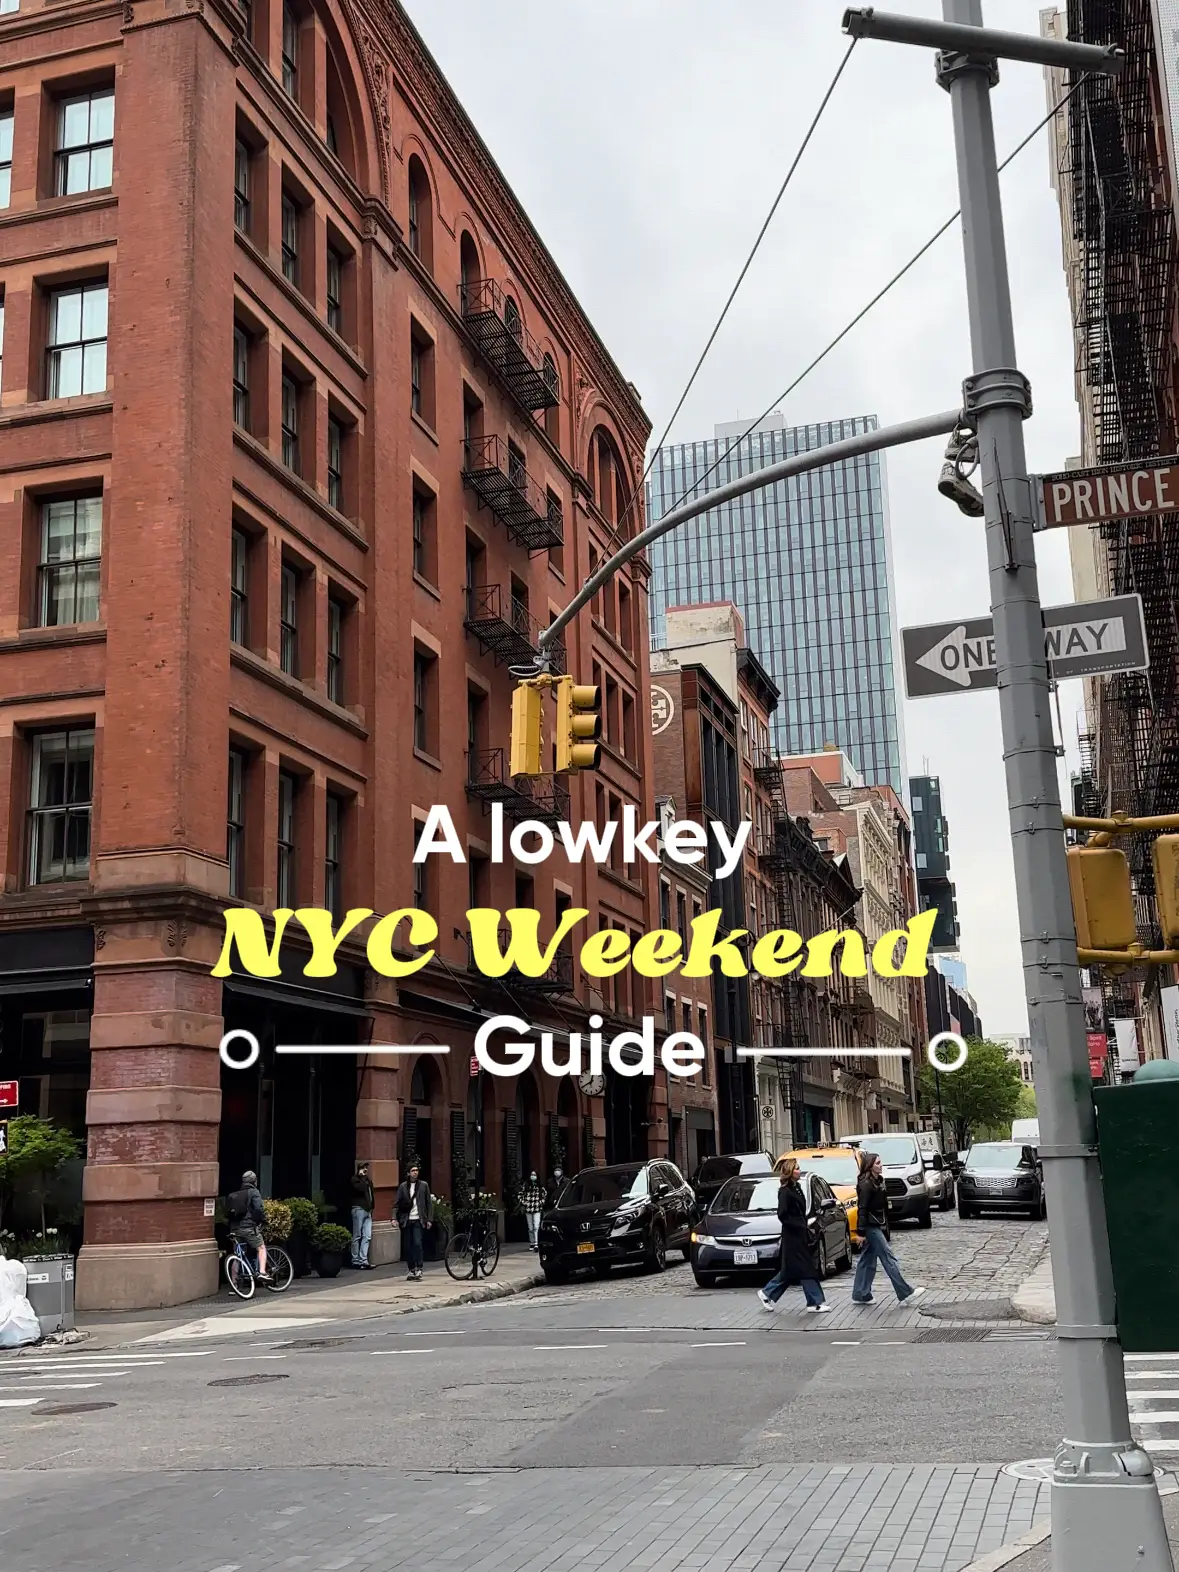 The best of nyc • A lowkey nyc weekend guide's images